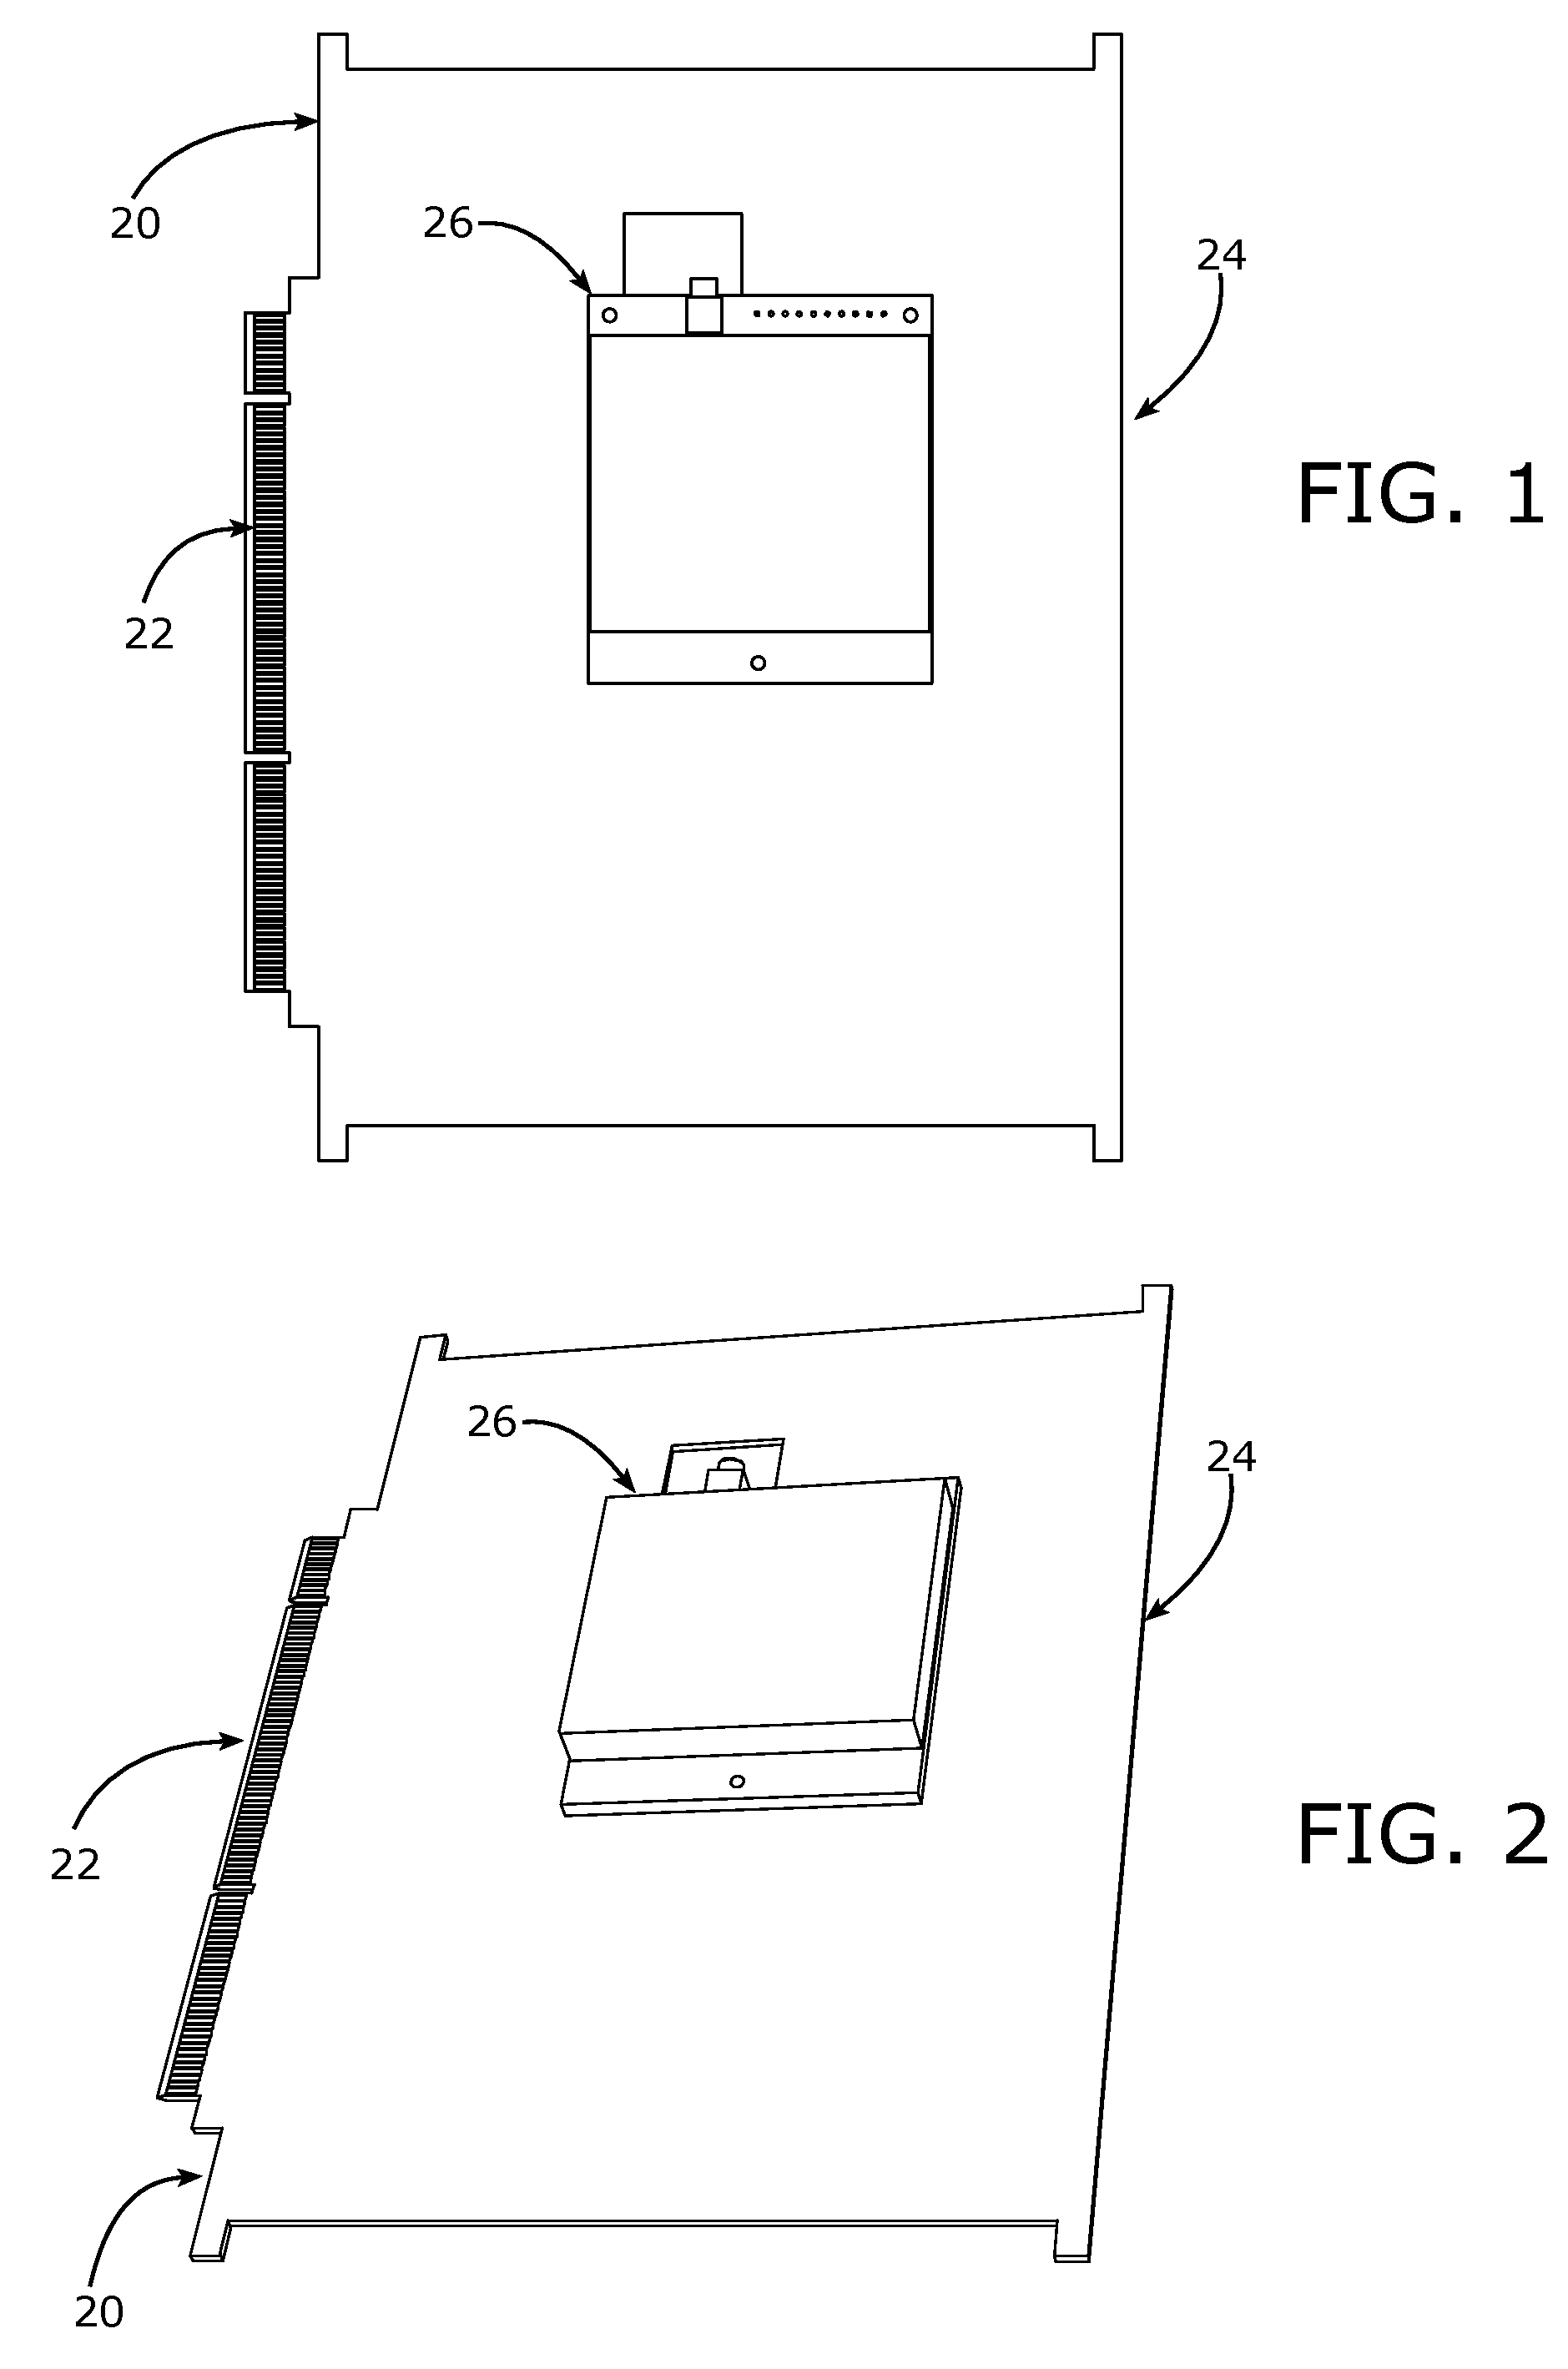 Card level enclosure system having enhanced thermal transfer and improved EMI characteristics